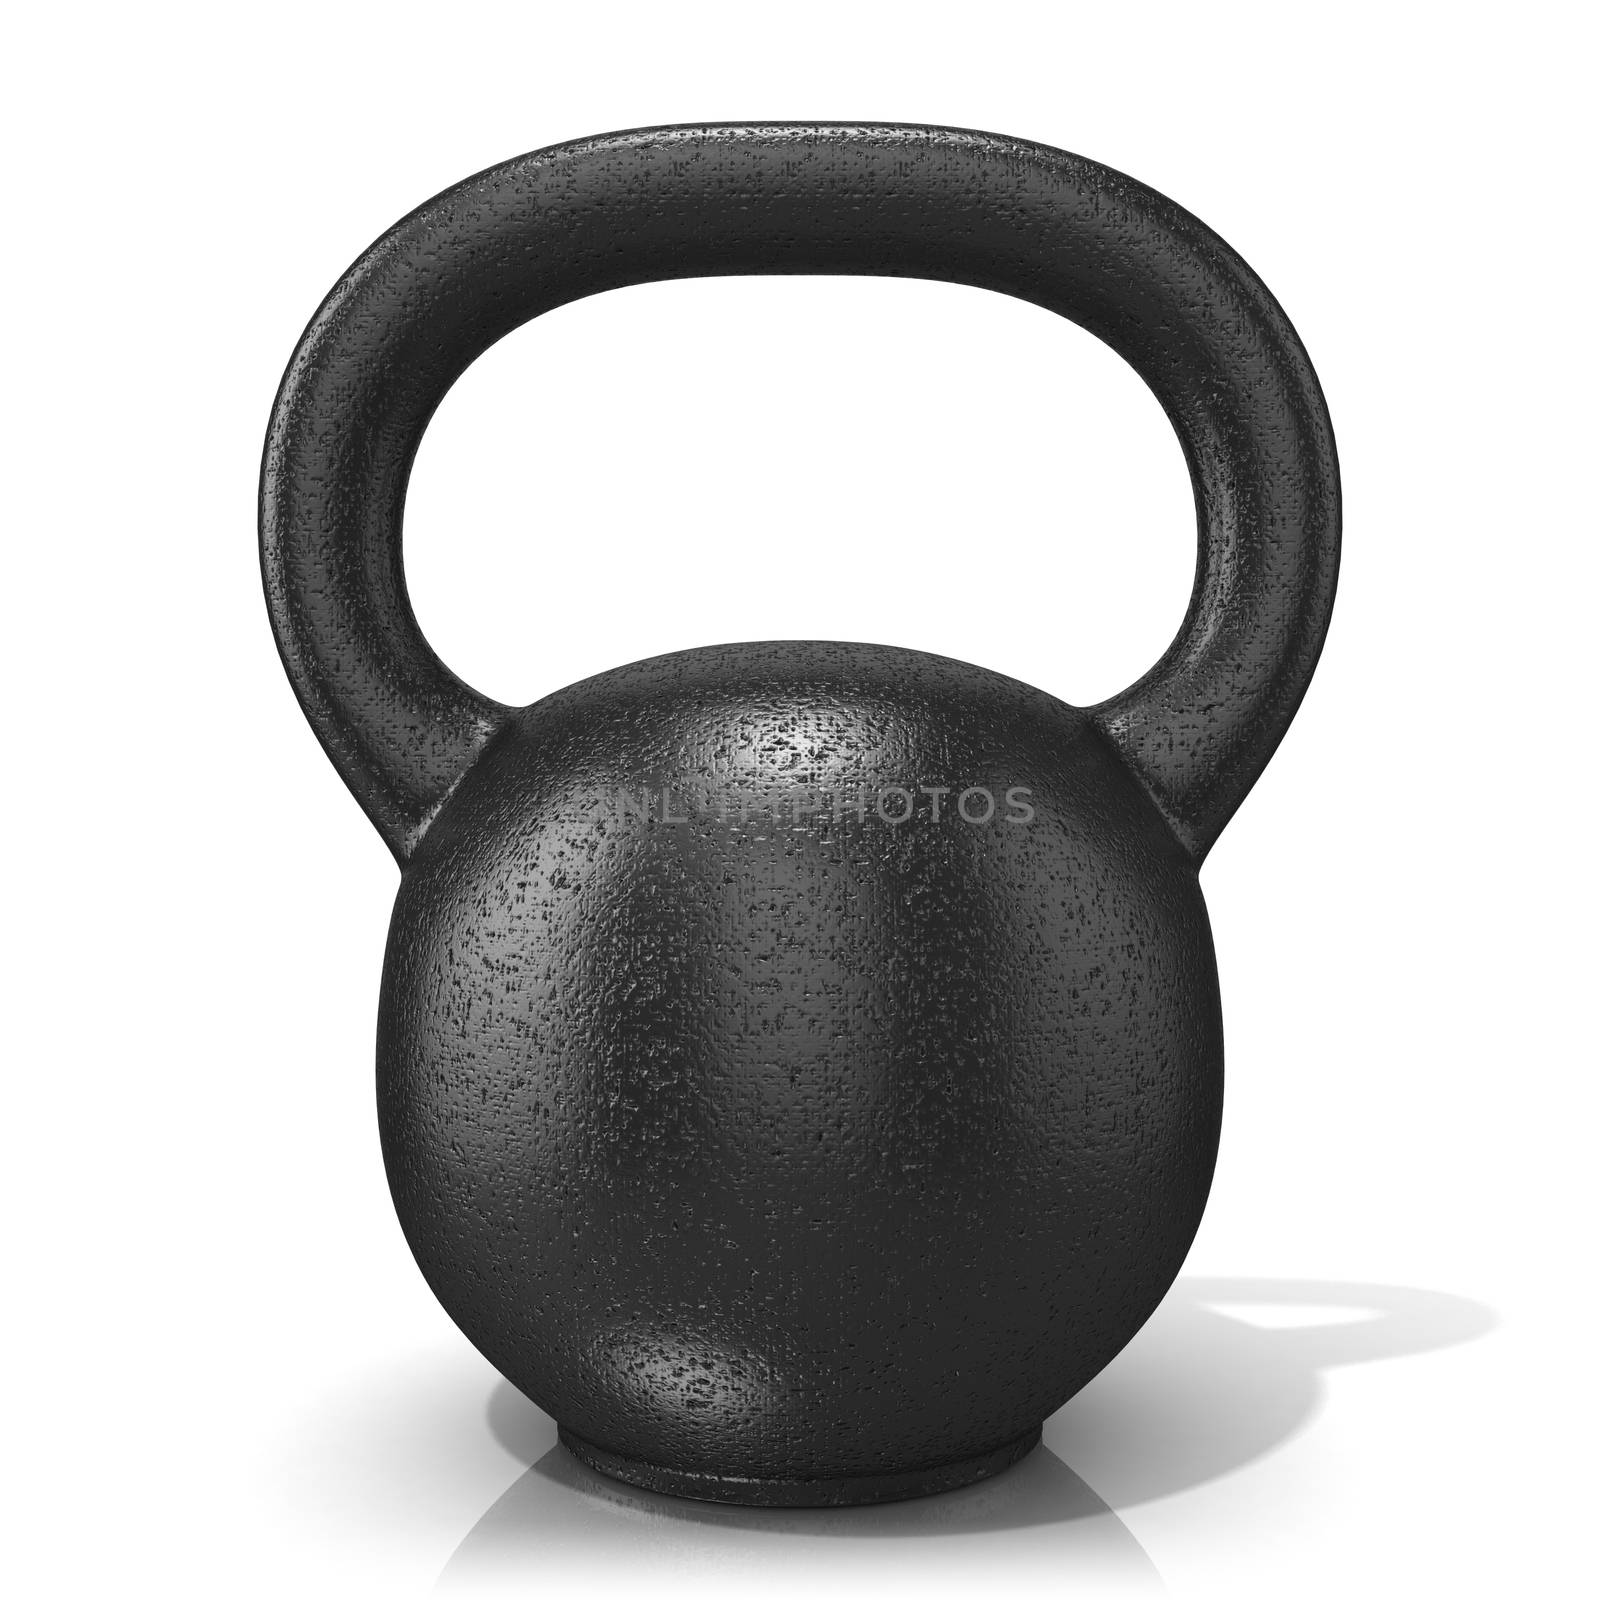 Rough cast iron kettle bell weight, isolated on a white background. 3D render illustration.